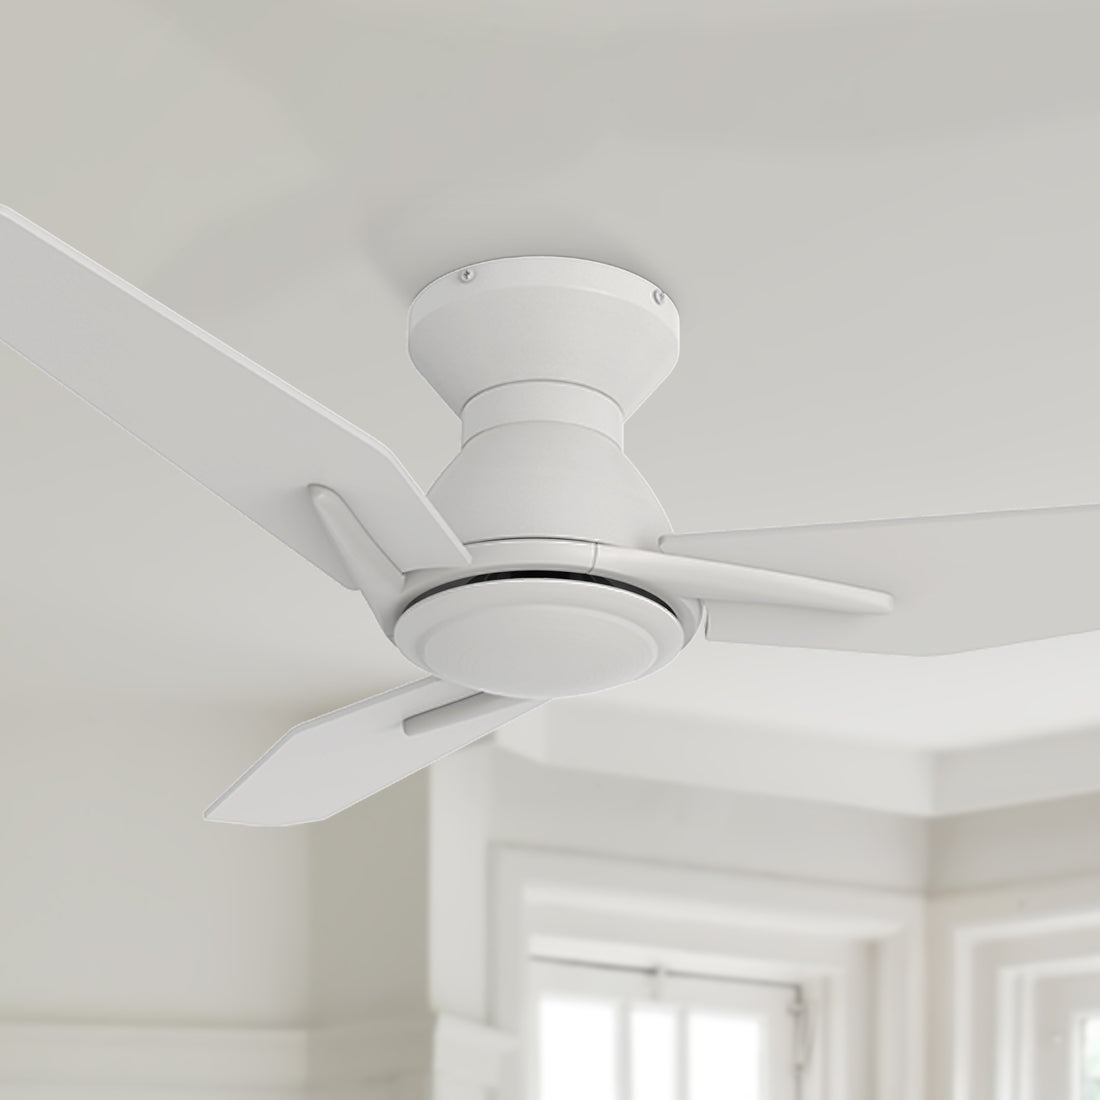 Carro smafan remote ceiling fans without lights 44 inch, white finish 